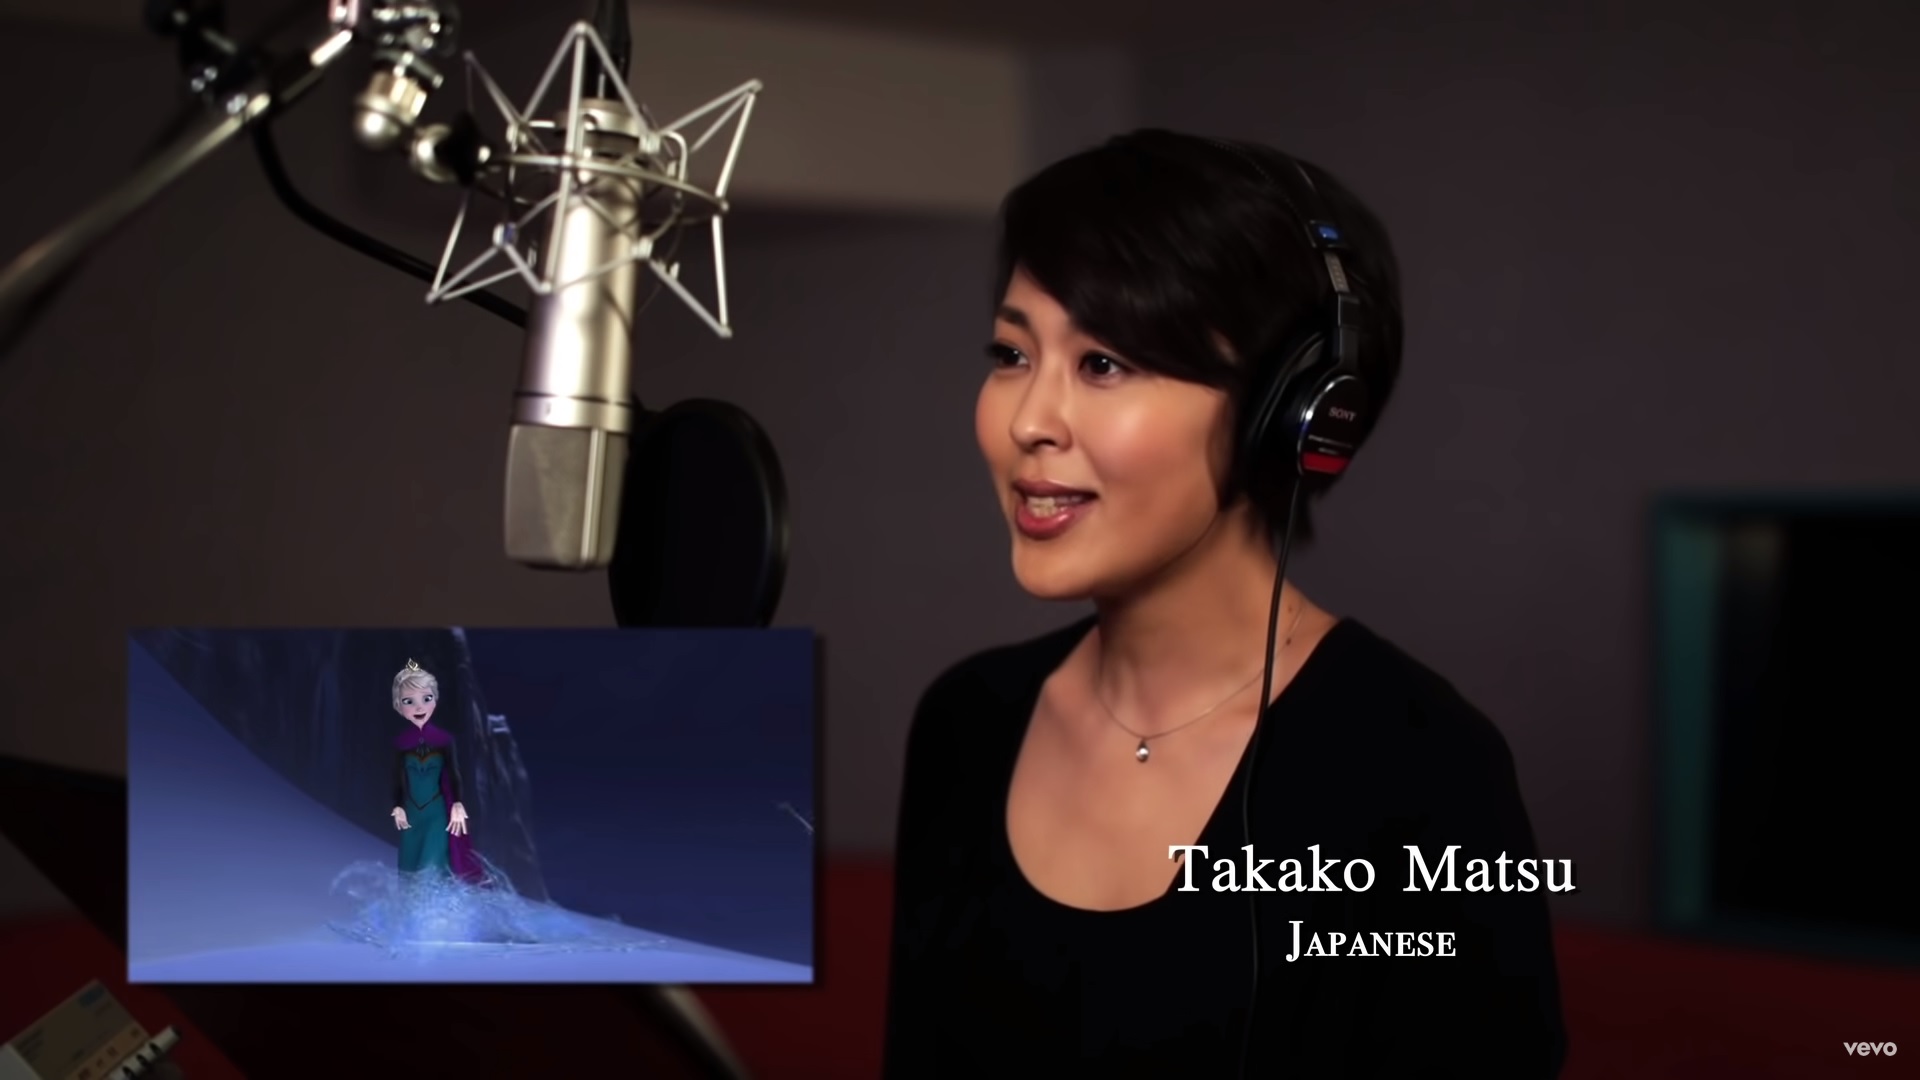 Let It Go: Watch the Singers Behind the Mic!